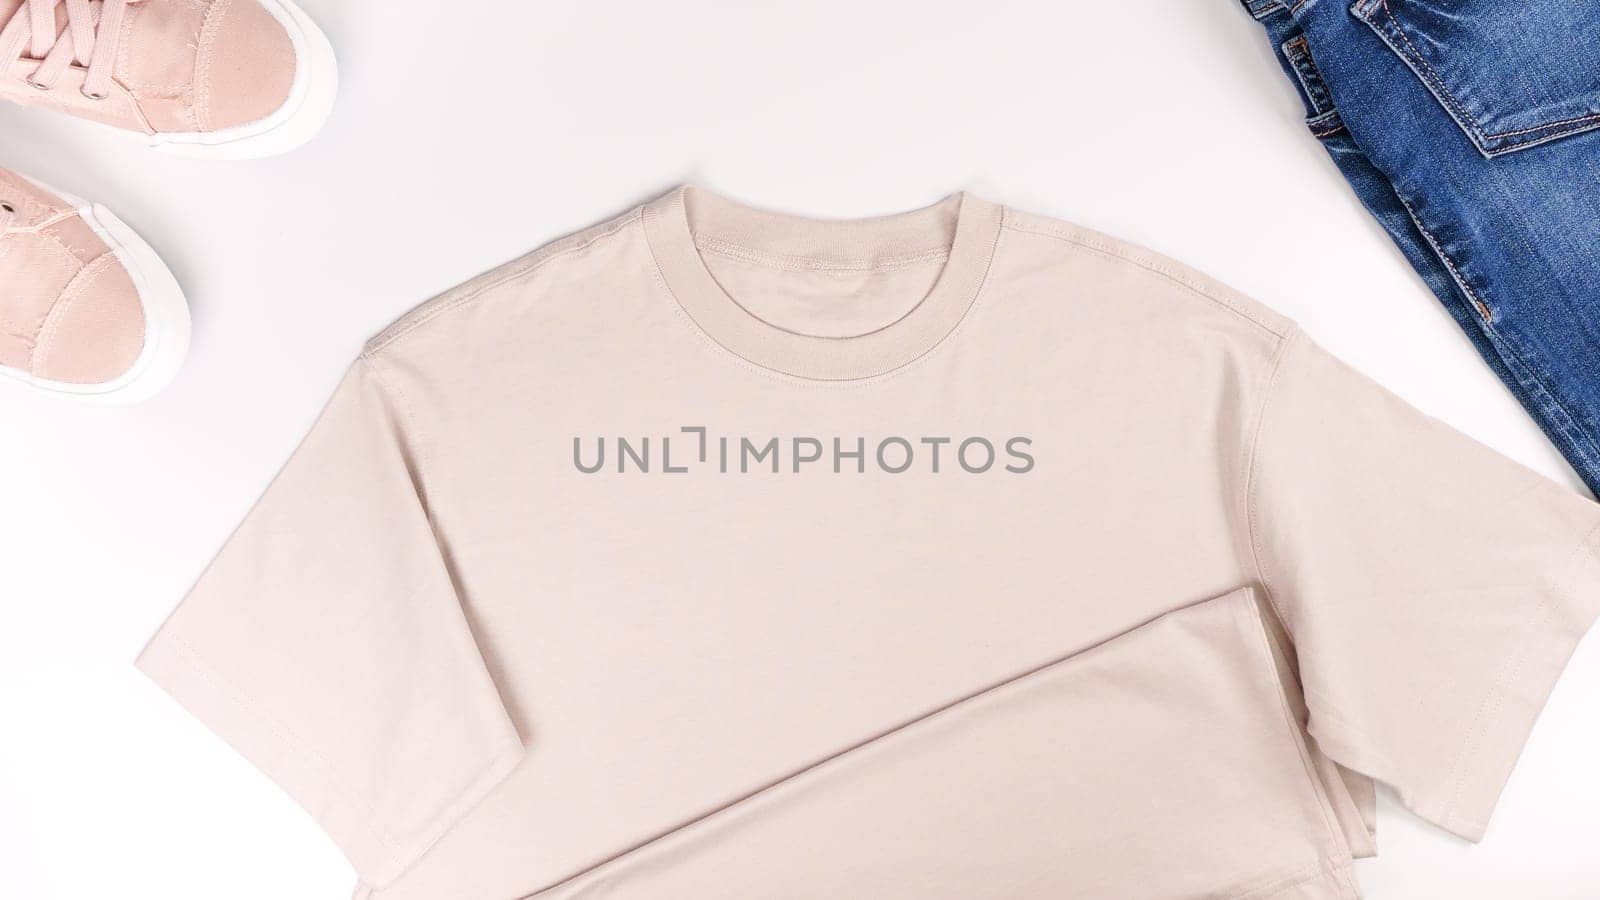 Beige unisex t shirt mock up flat lay on white background. Top front view t-shirt, snikers, jeans and copy space. Mockup t-shirt and summertime. Template blank shirt. by JuliaDorian